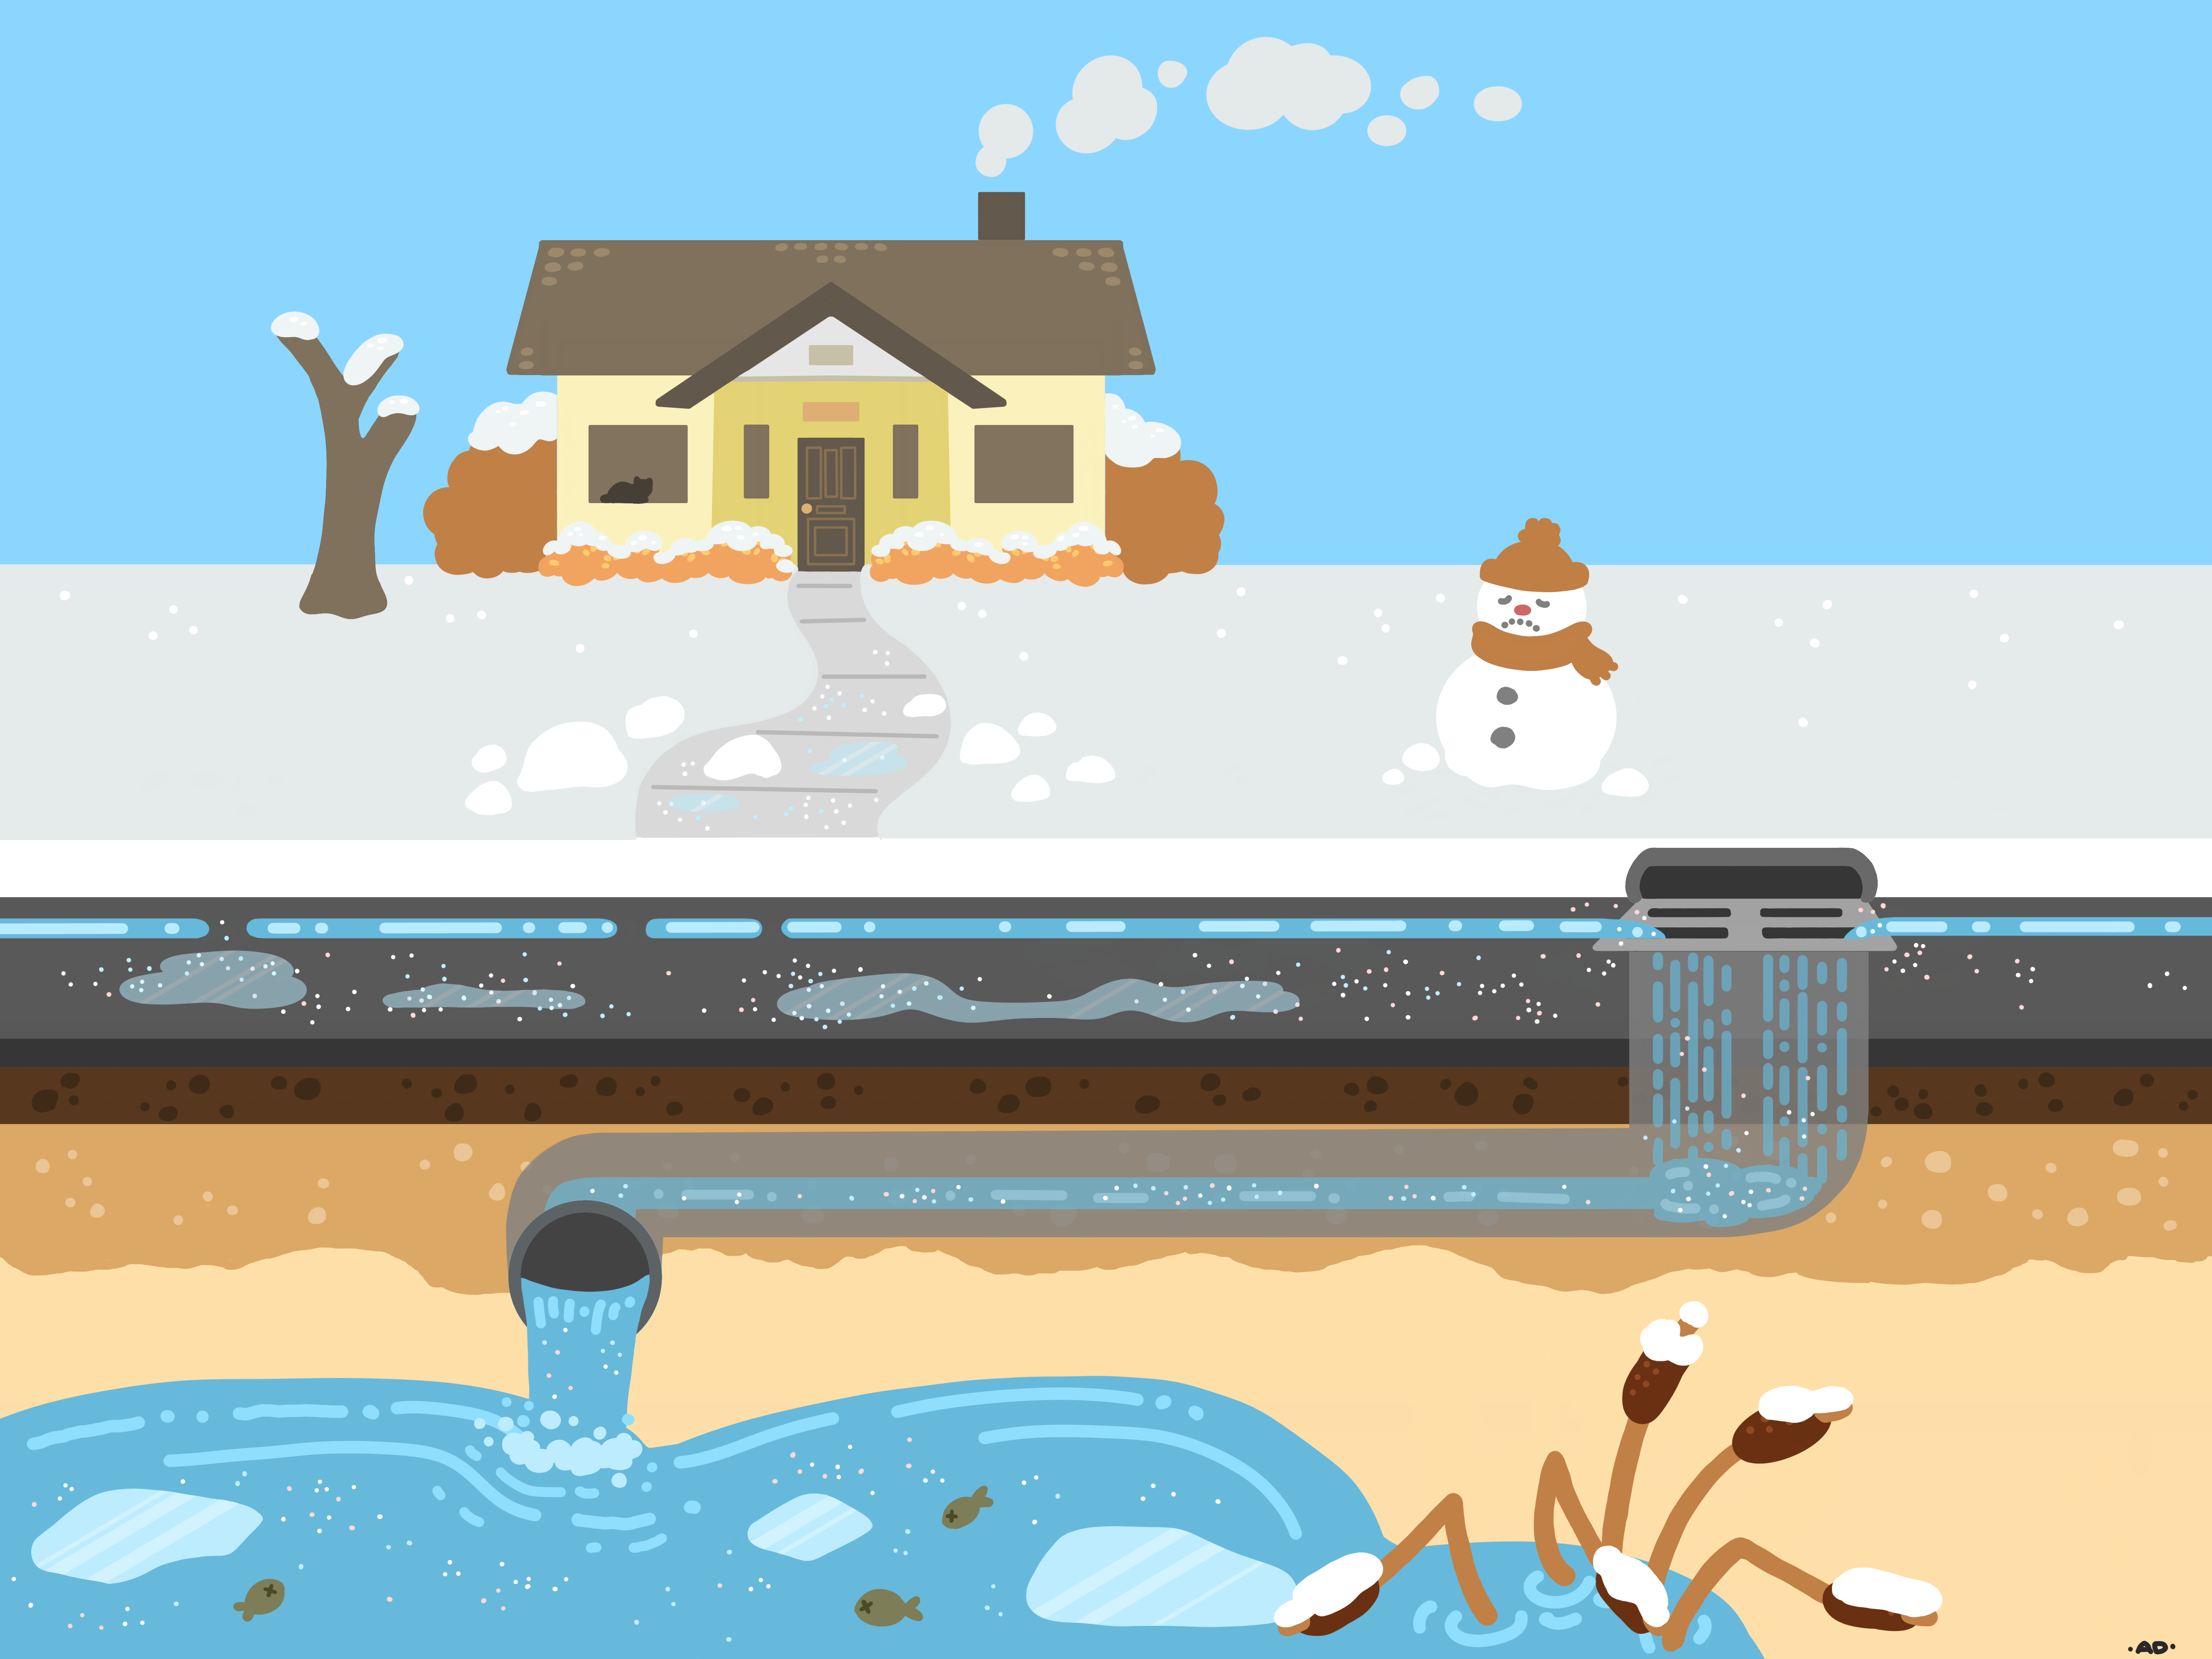 Polluted stormwater infographic, winter.png